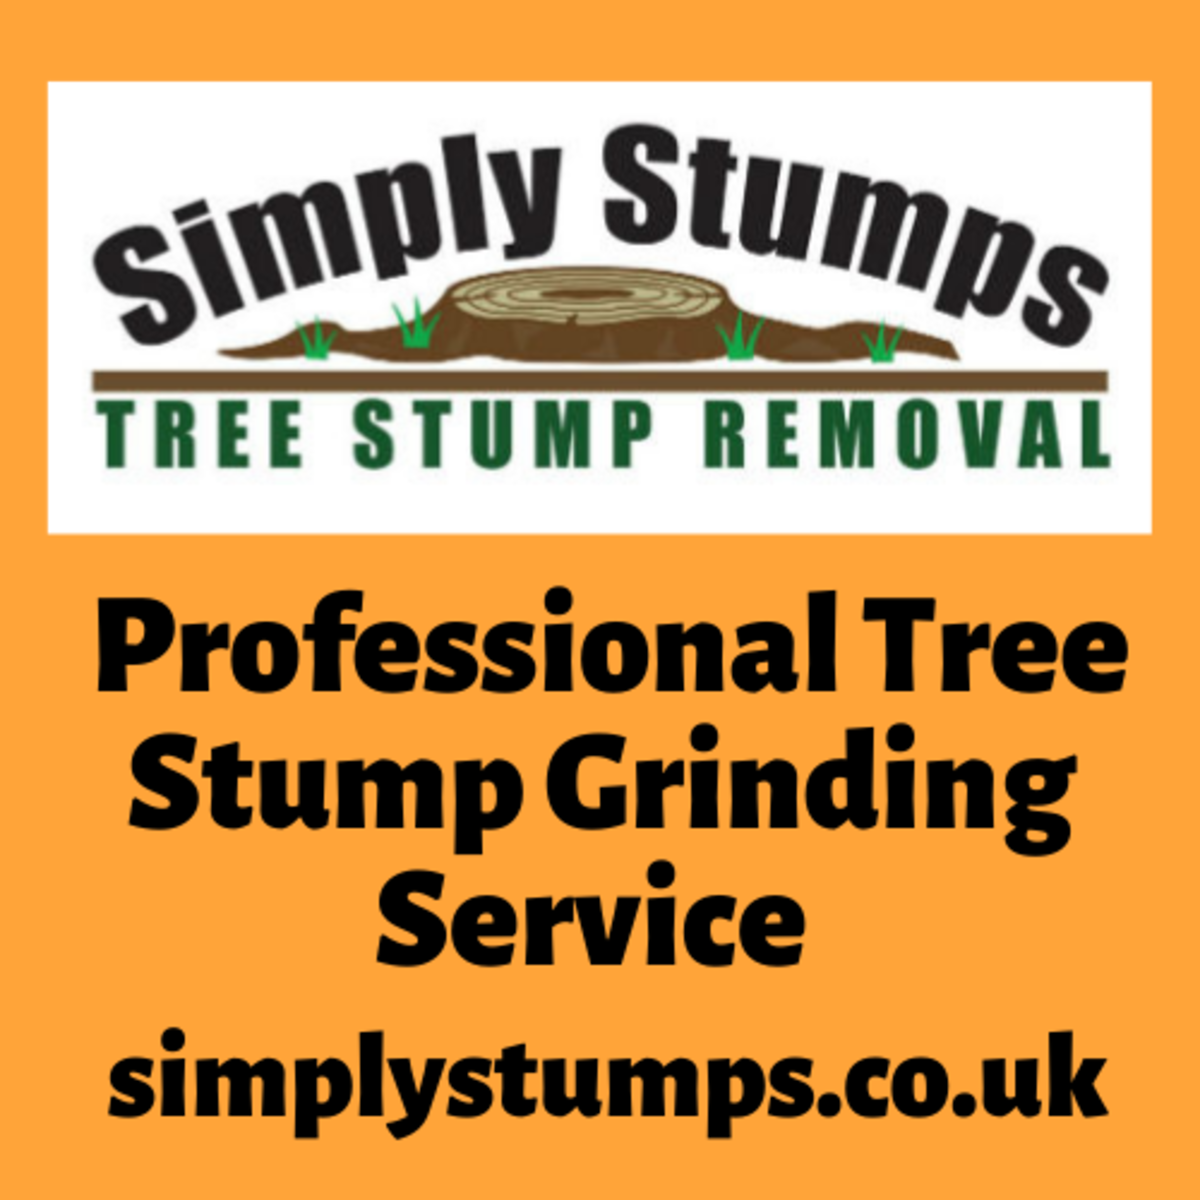 Simply Stumps - Tree Stump Grinding/Removal